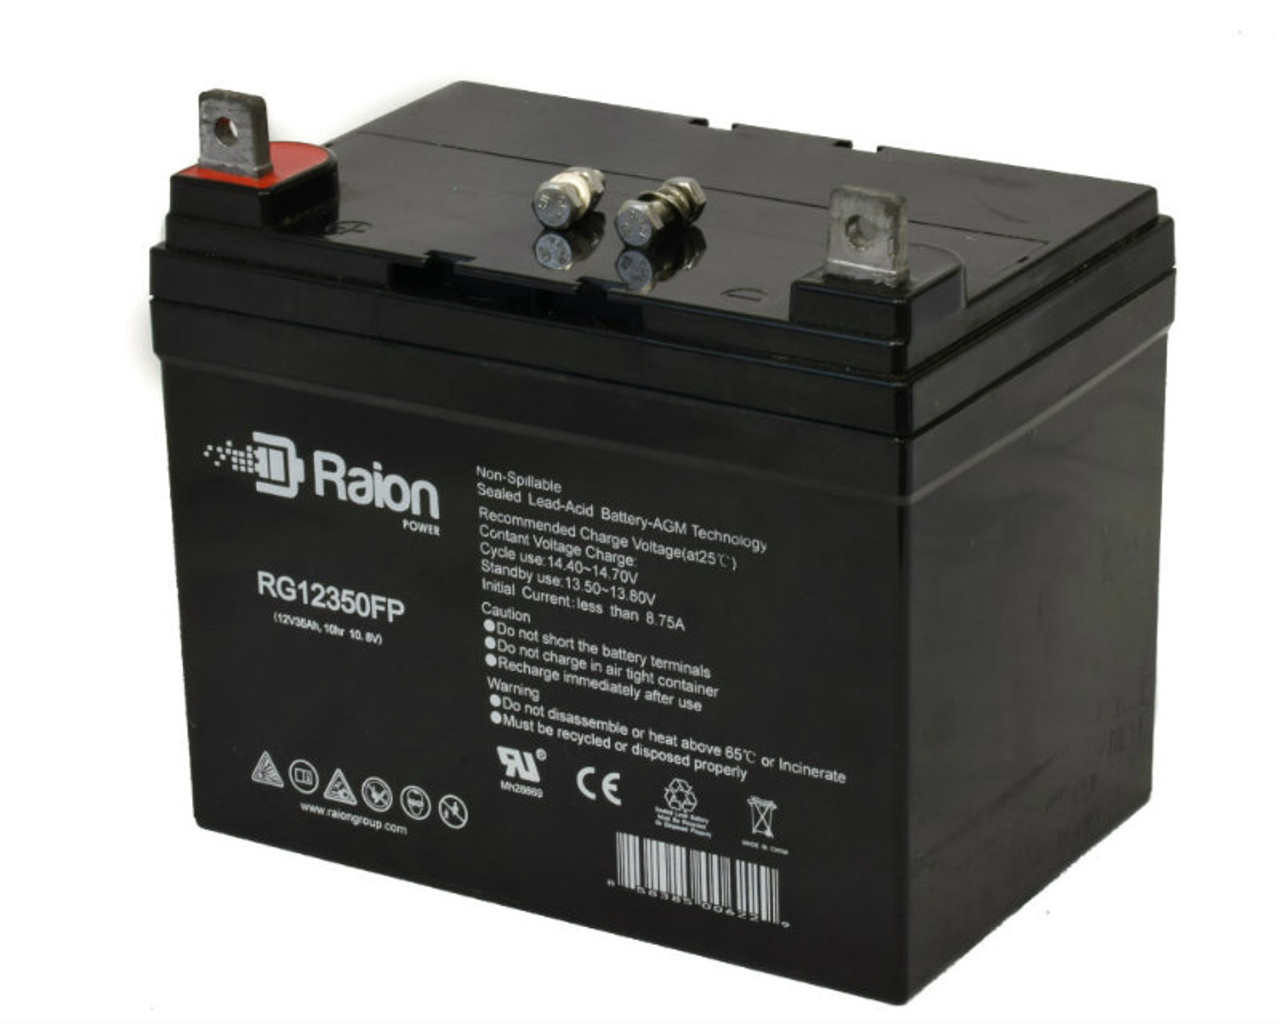 Raion Power Replacement 12V 35Ah RG12350FP Battery for Kees ZT Max